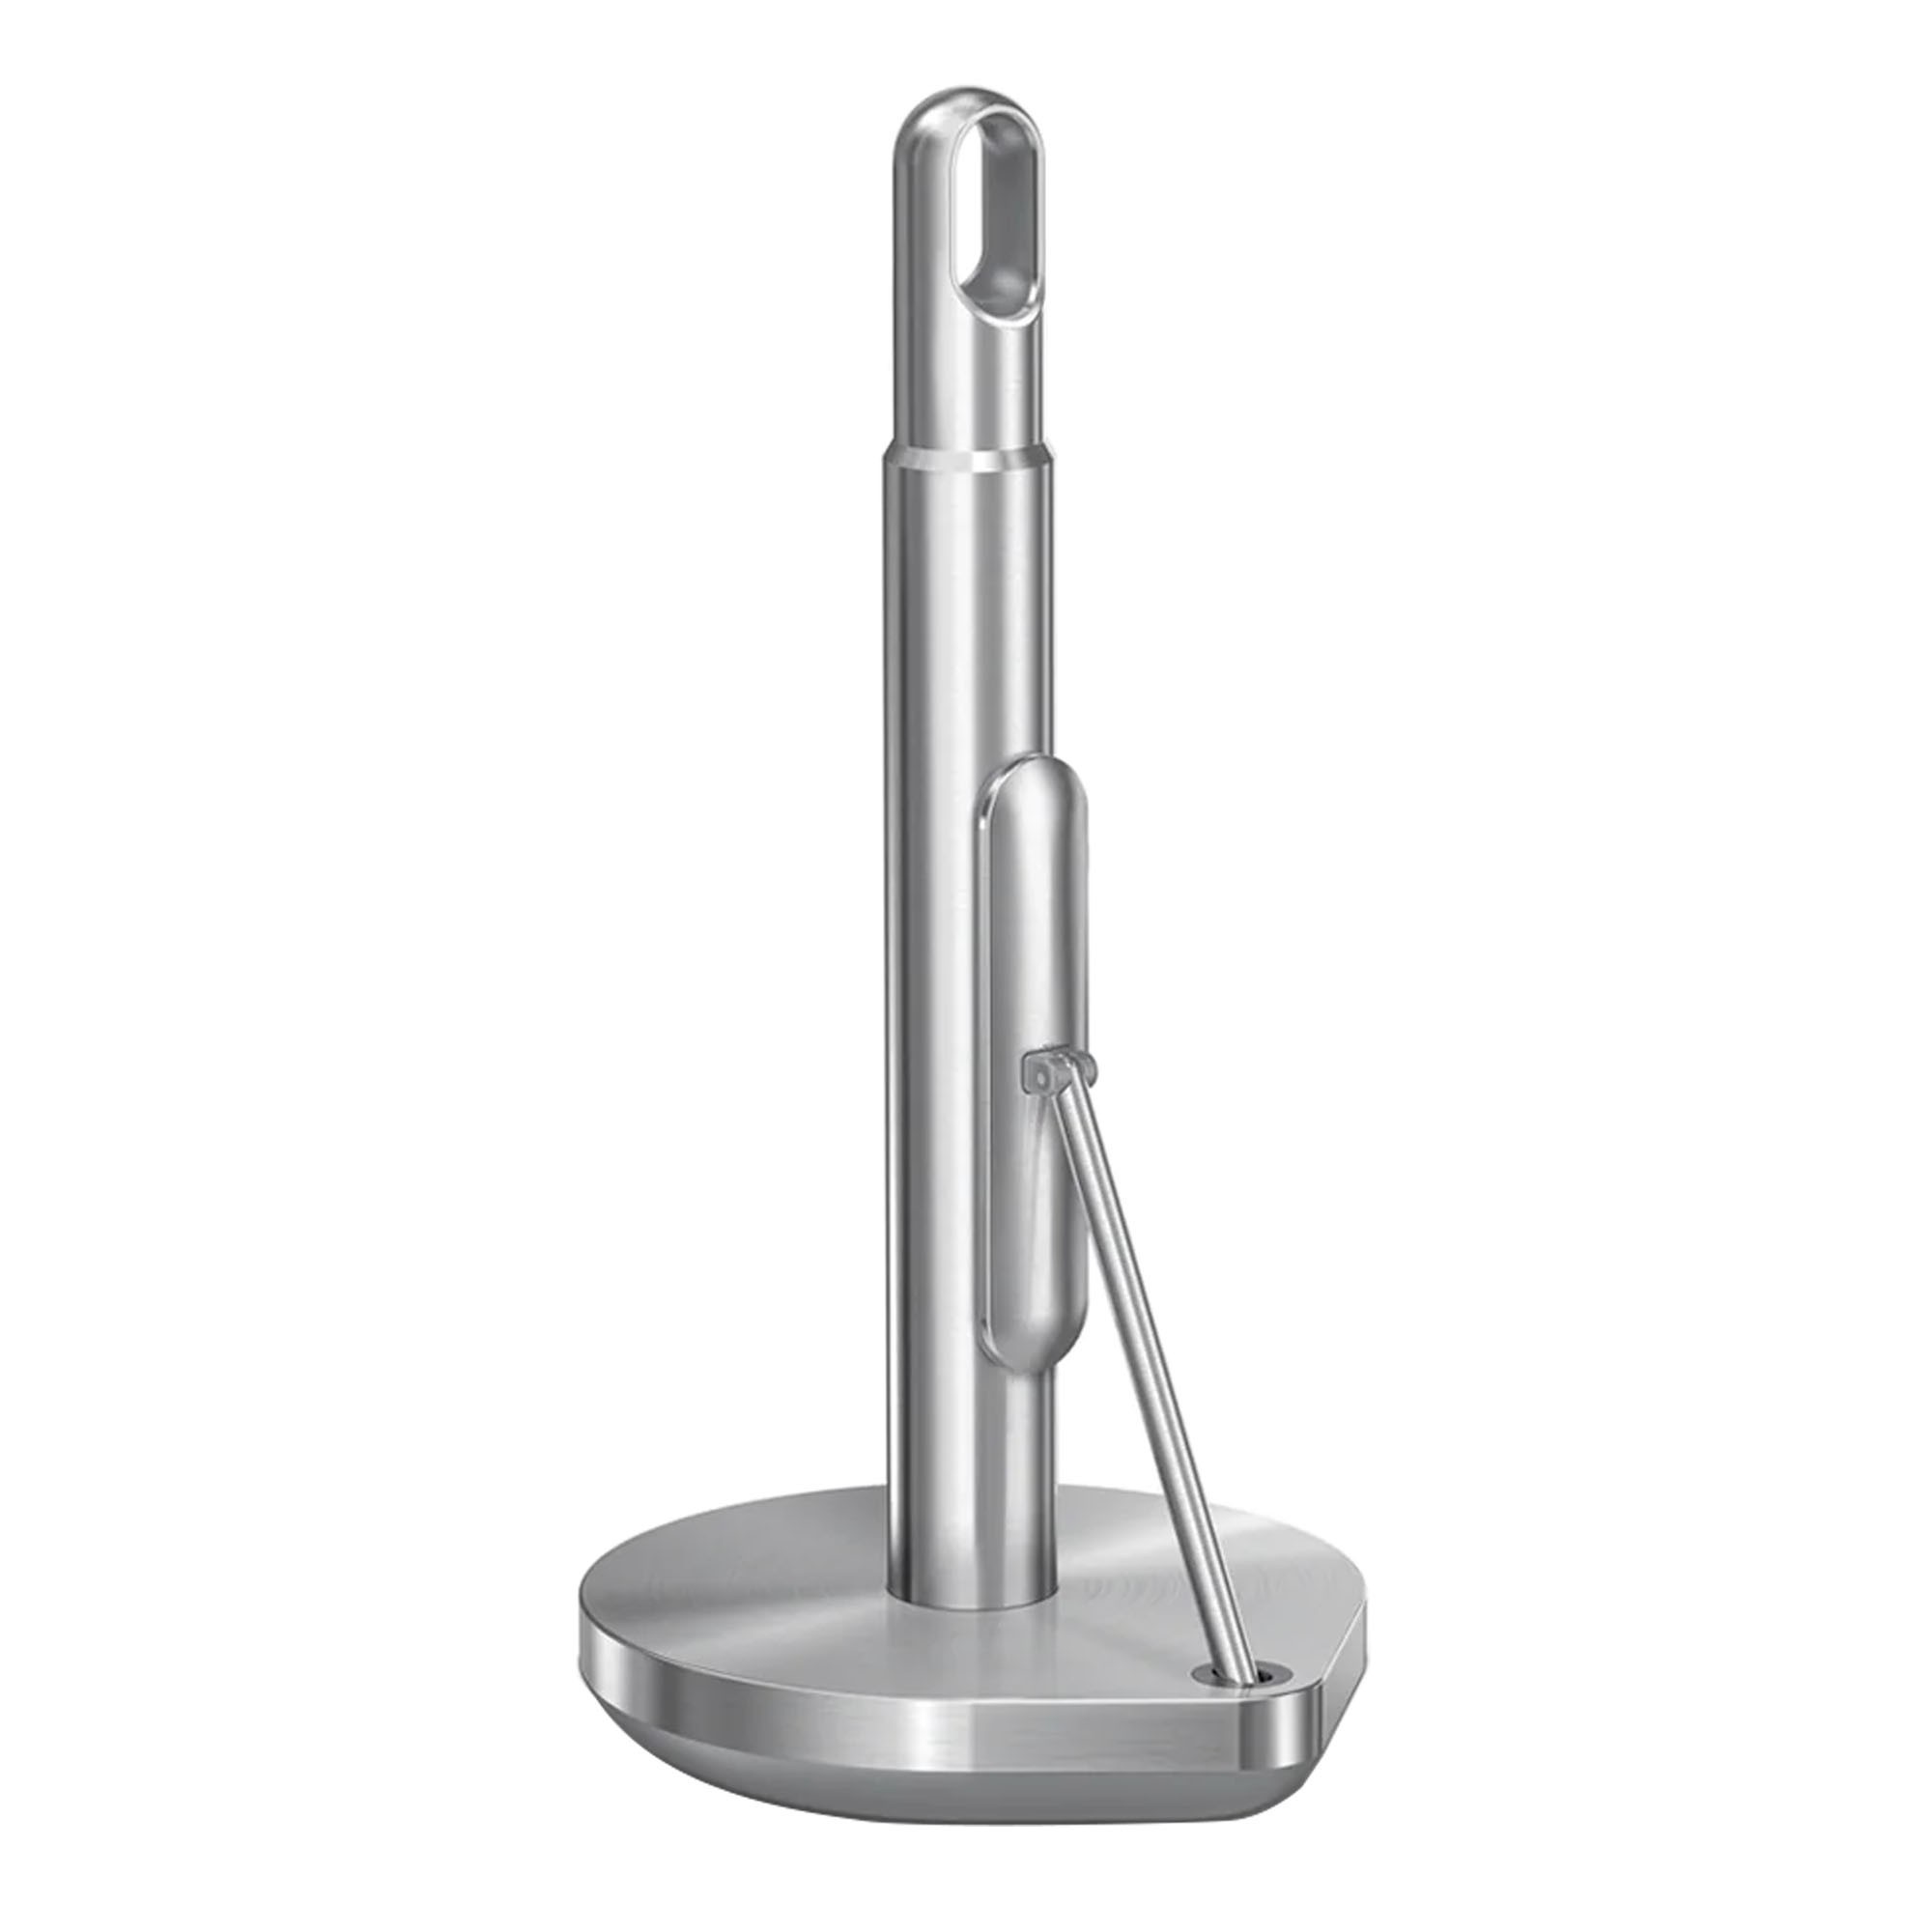 Paper towel roll holder, 36.3 cm, brushed stainless steel